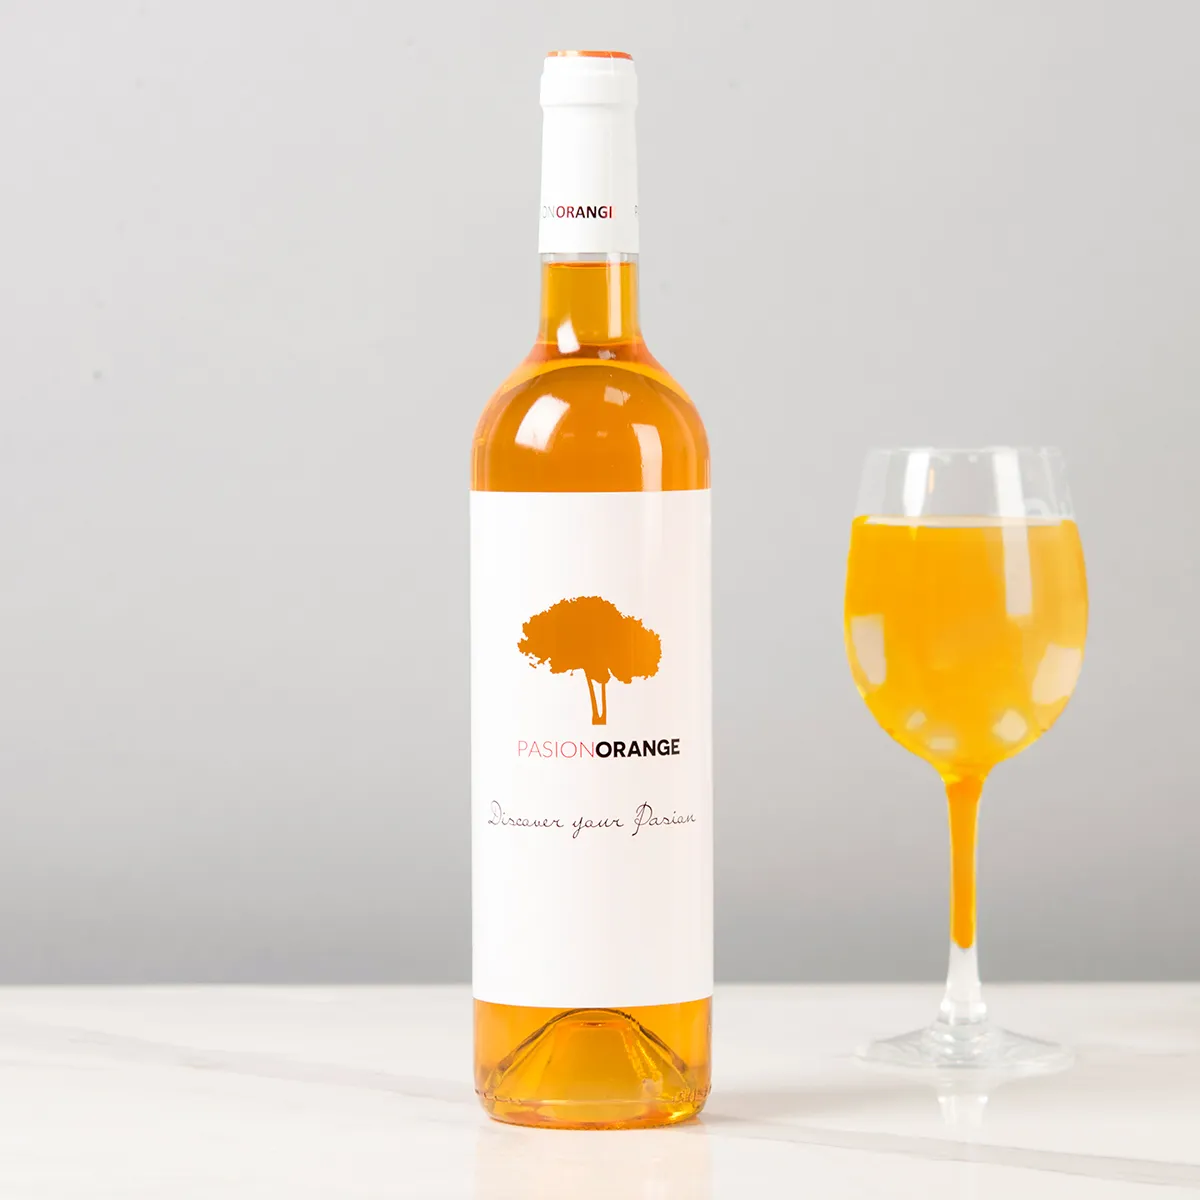 Orange Wine: How It’s Made, Benefits, and Downsides